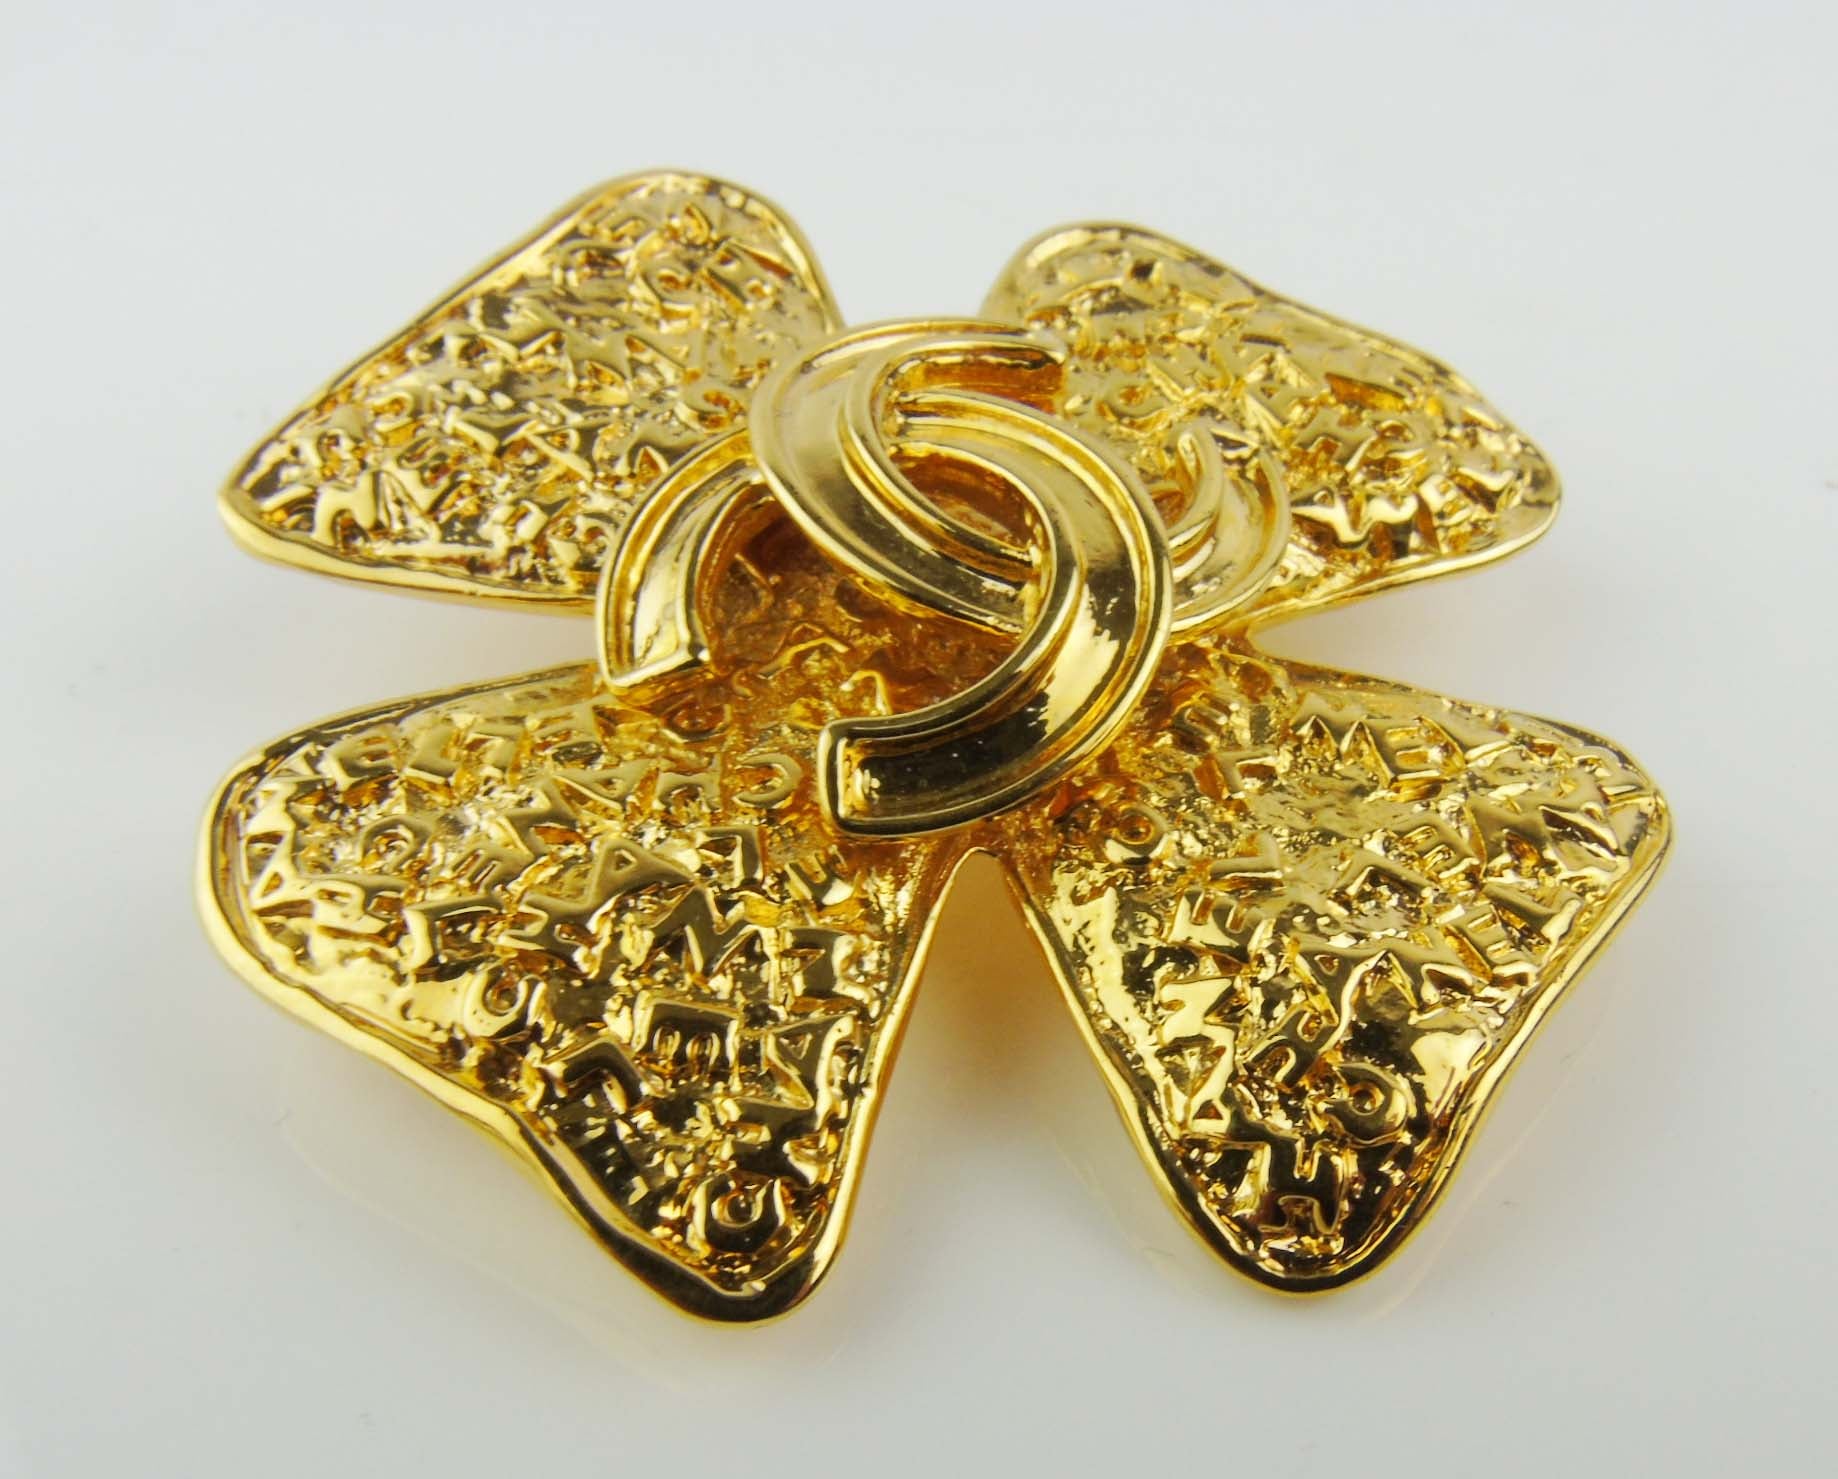 CHANEL - Vintage Gold-tone Brooch - Four Leaf Clover Clothes Pin, CHANEL